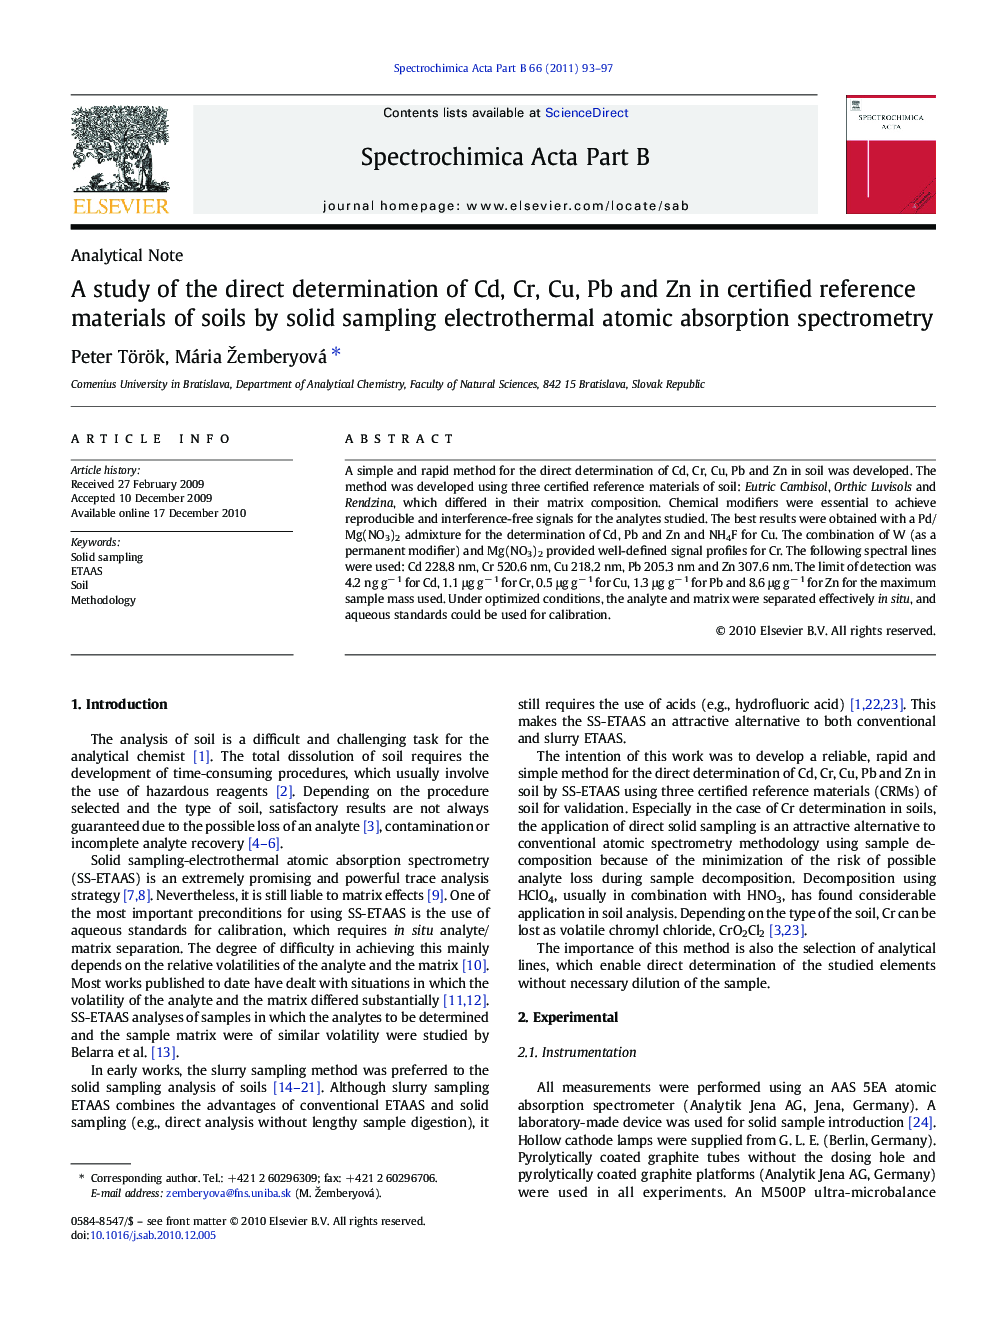 A study of the direct determination of Cd, Cr, Cu, Pb and Zn in certified reference materials of soils by solid sampling electrothermal atomic absorption spectrometry